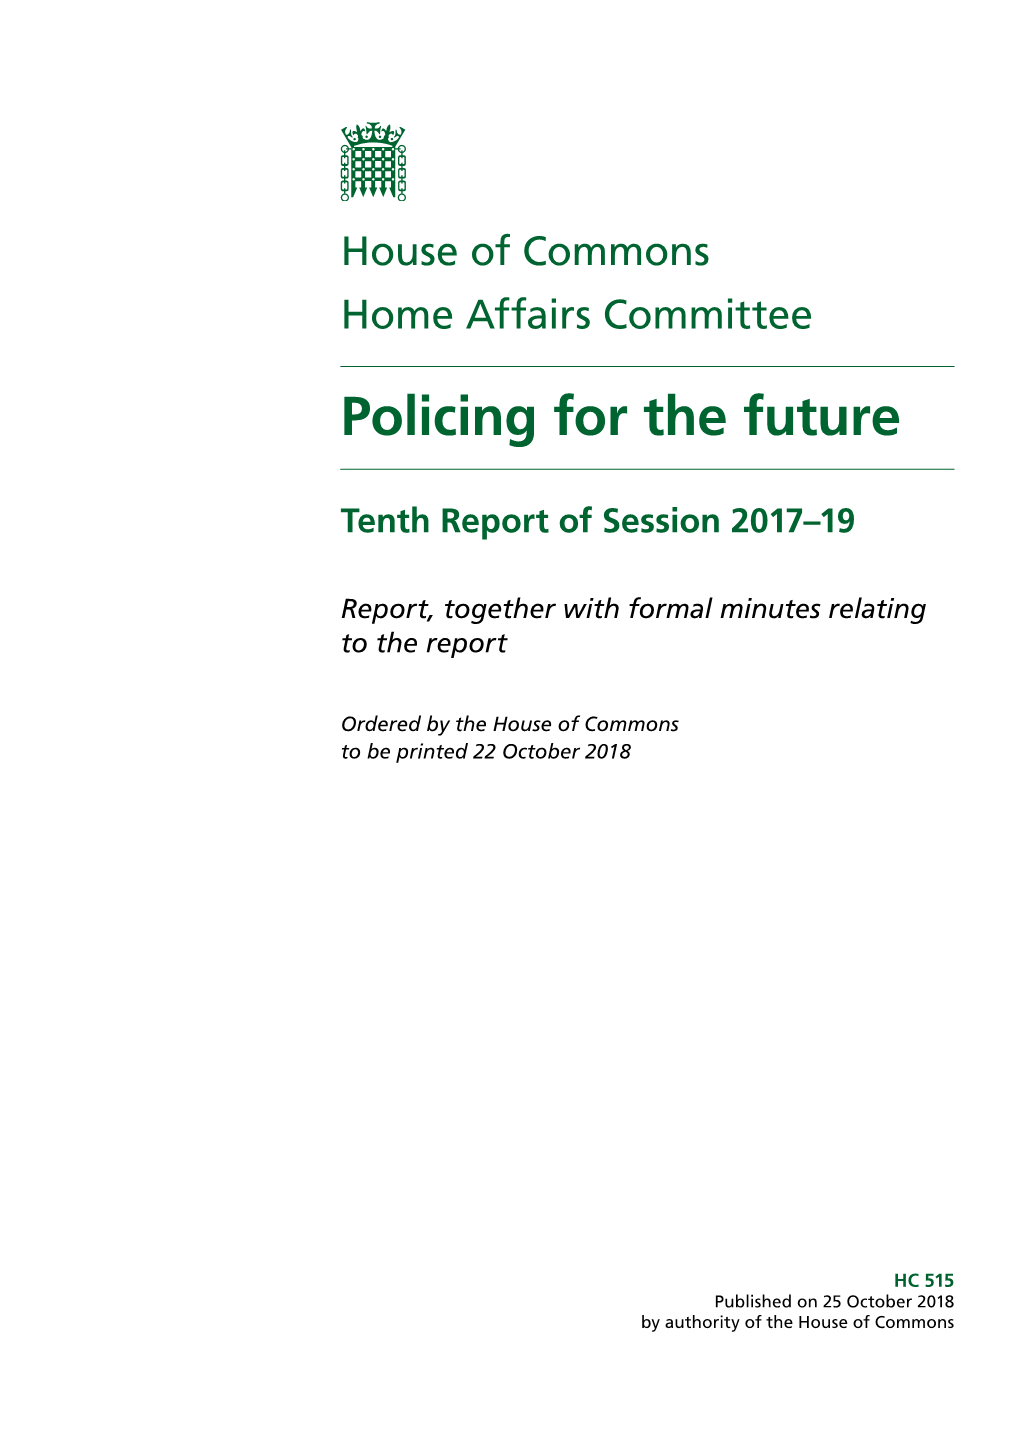 Policing for the Future